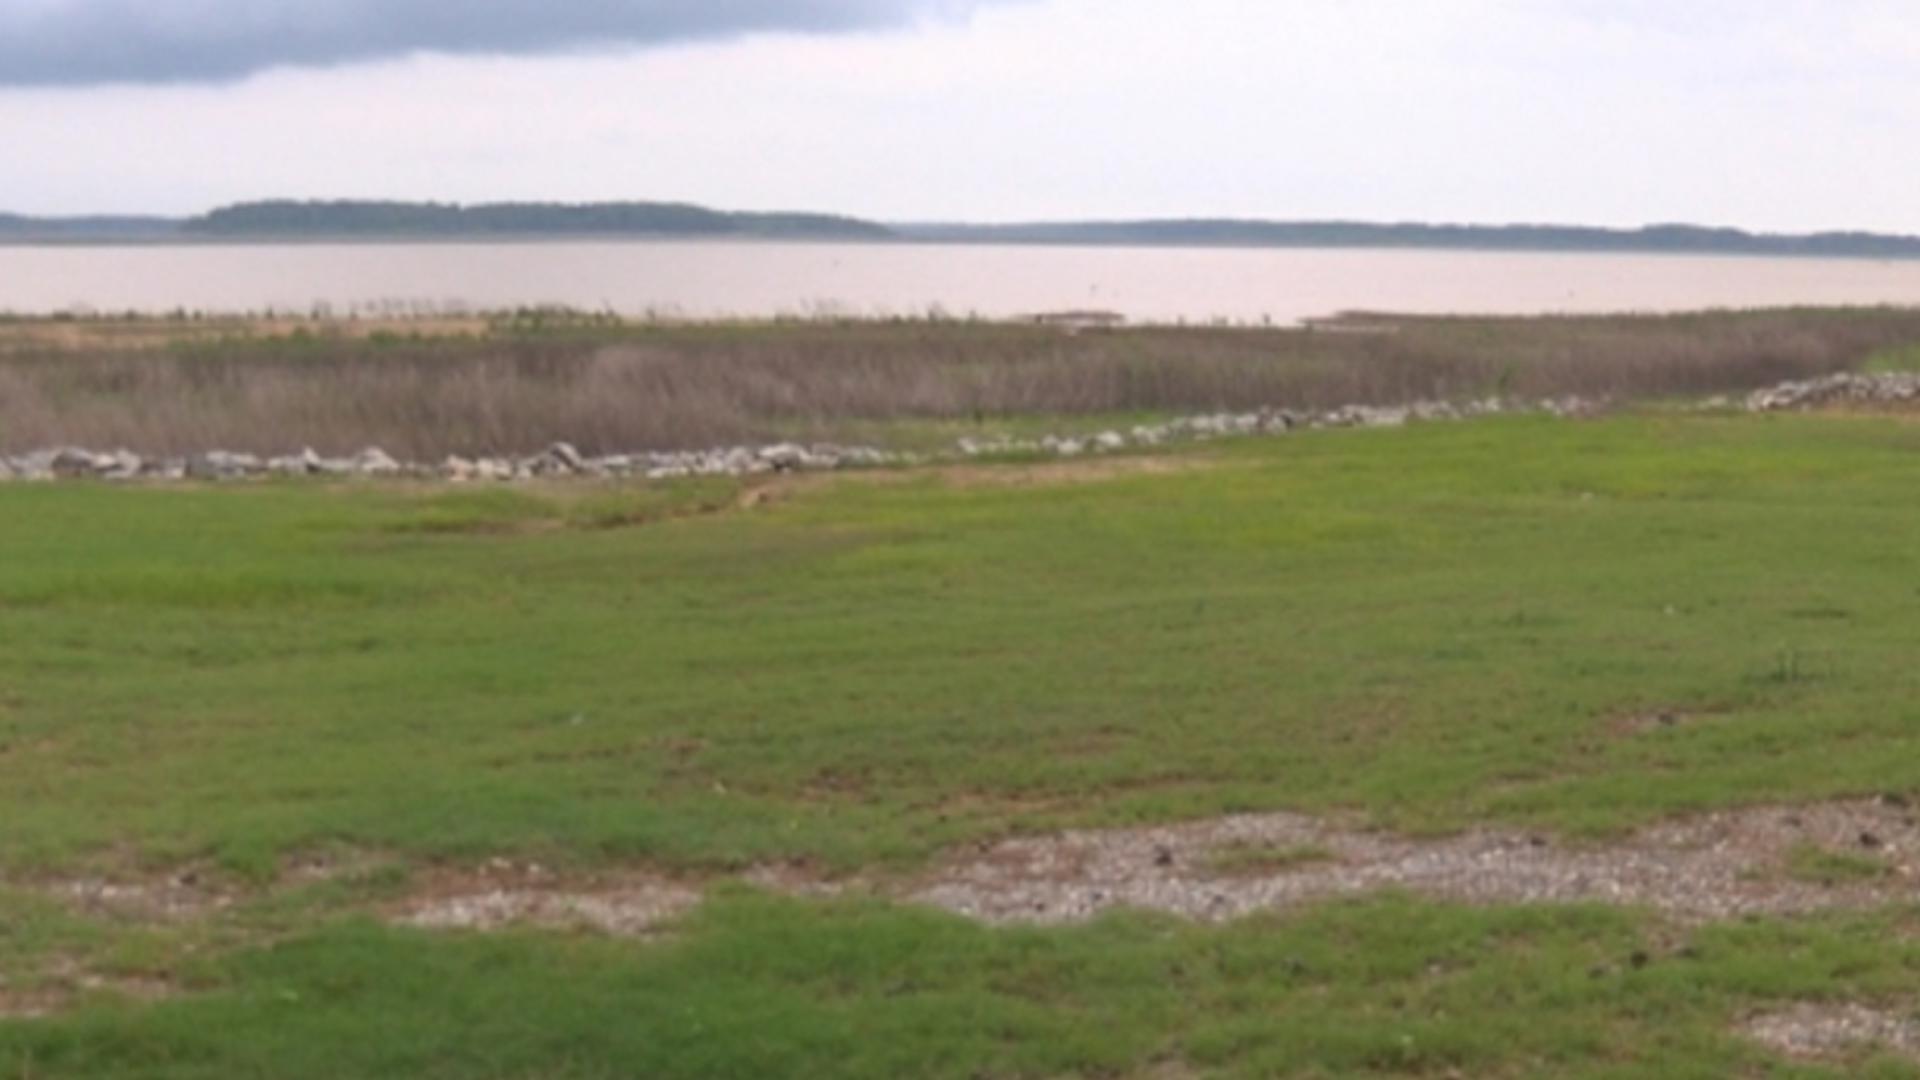 Rangers have been preparing for thousands of people to make their way to Arkabutla Lake in Hernando, Mississippi.